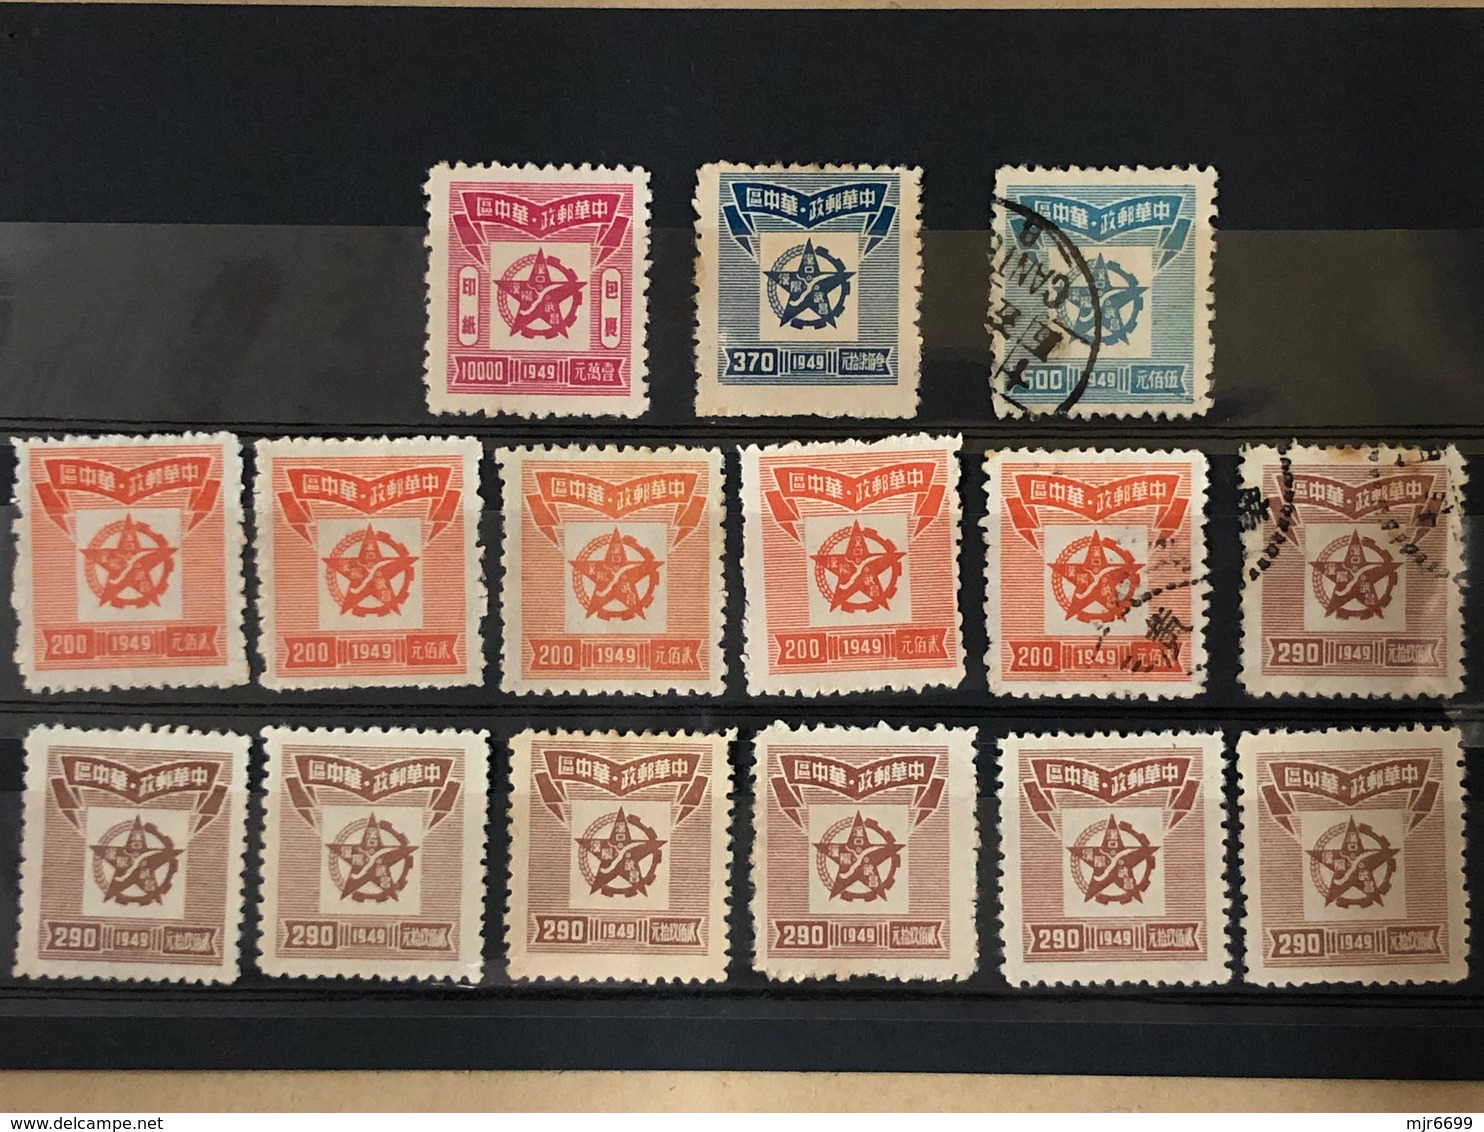 LOT OF 15 STAMPS, USED AND UNUSED NO GUM AS ISSUED. - Zentralchina 1948-49